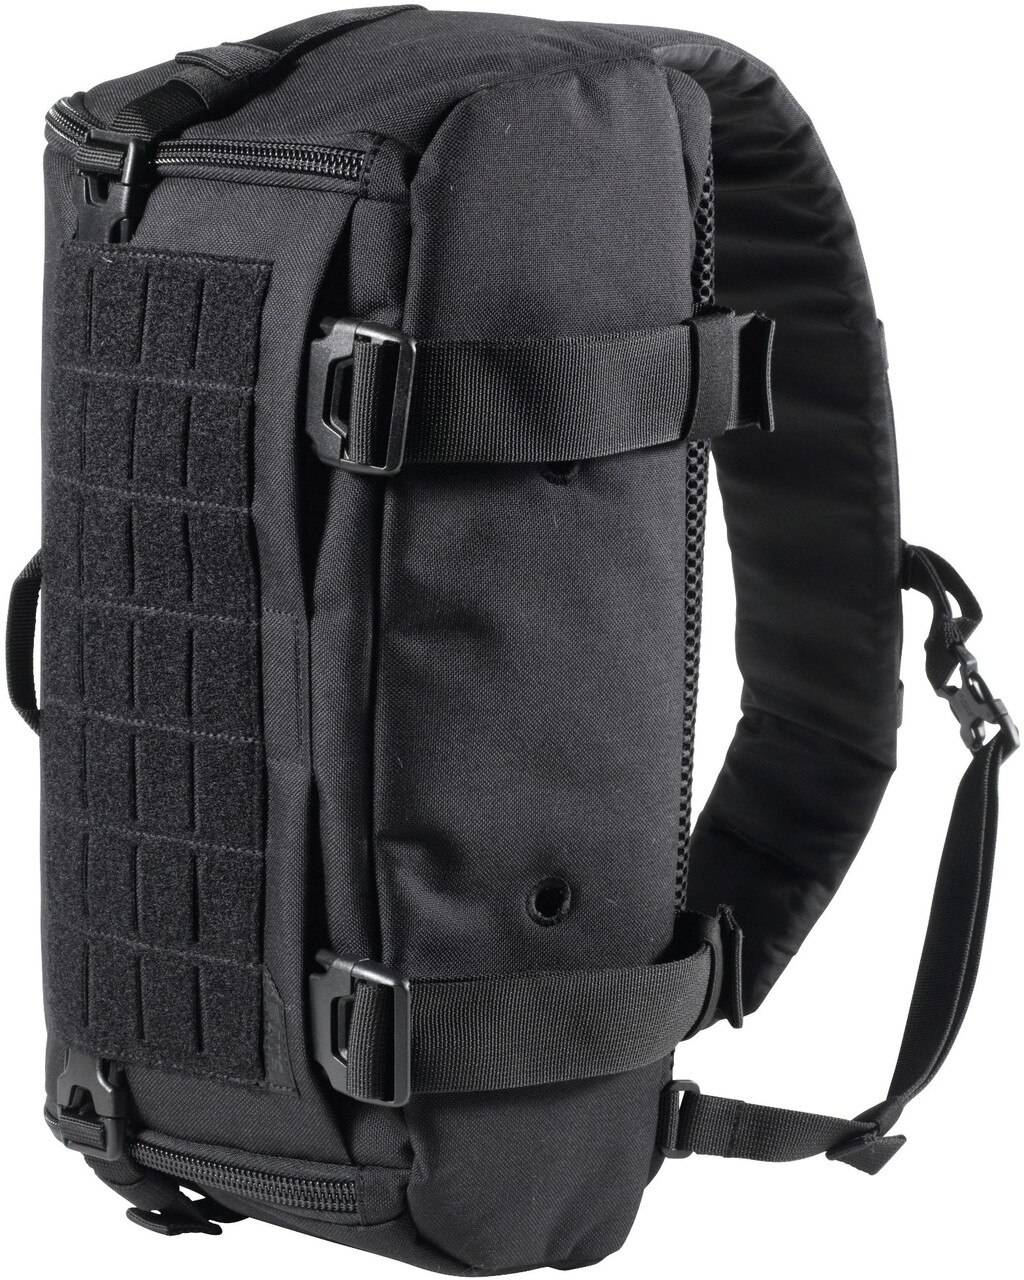 5.11 Tactical - You think a 5.11 sling pack isn't for you